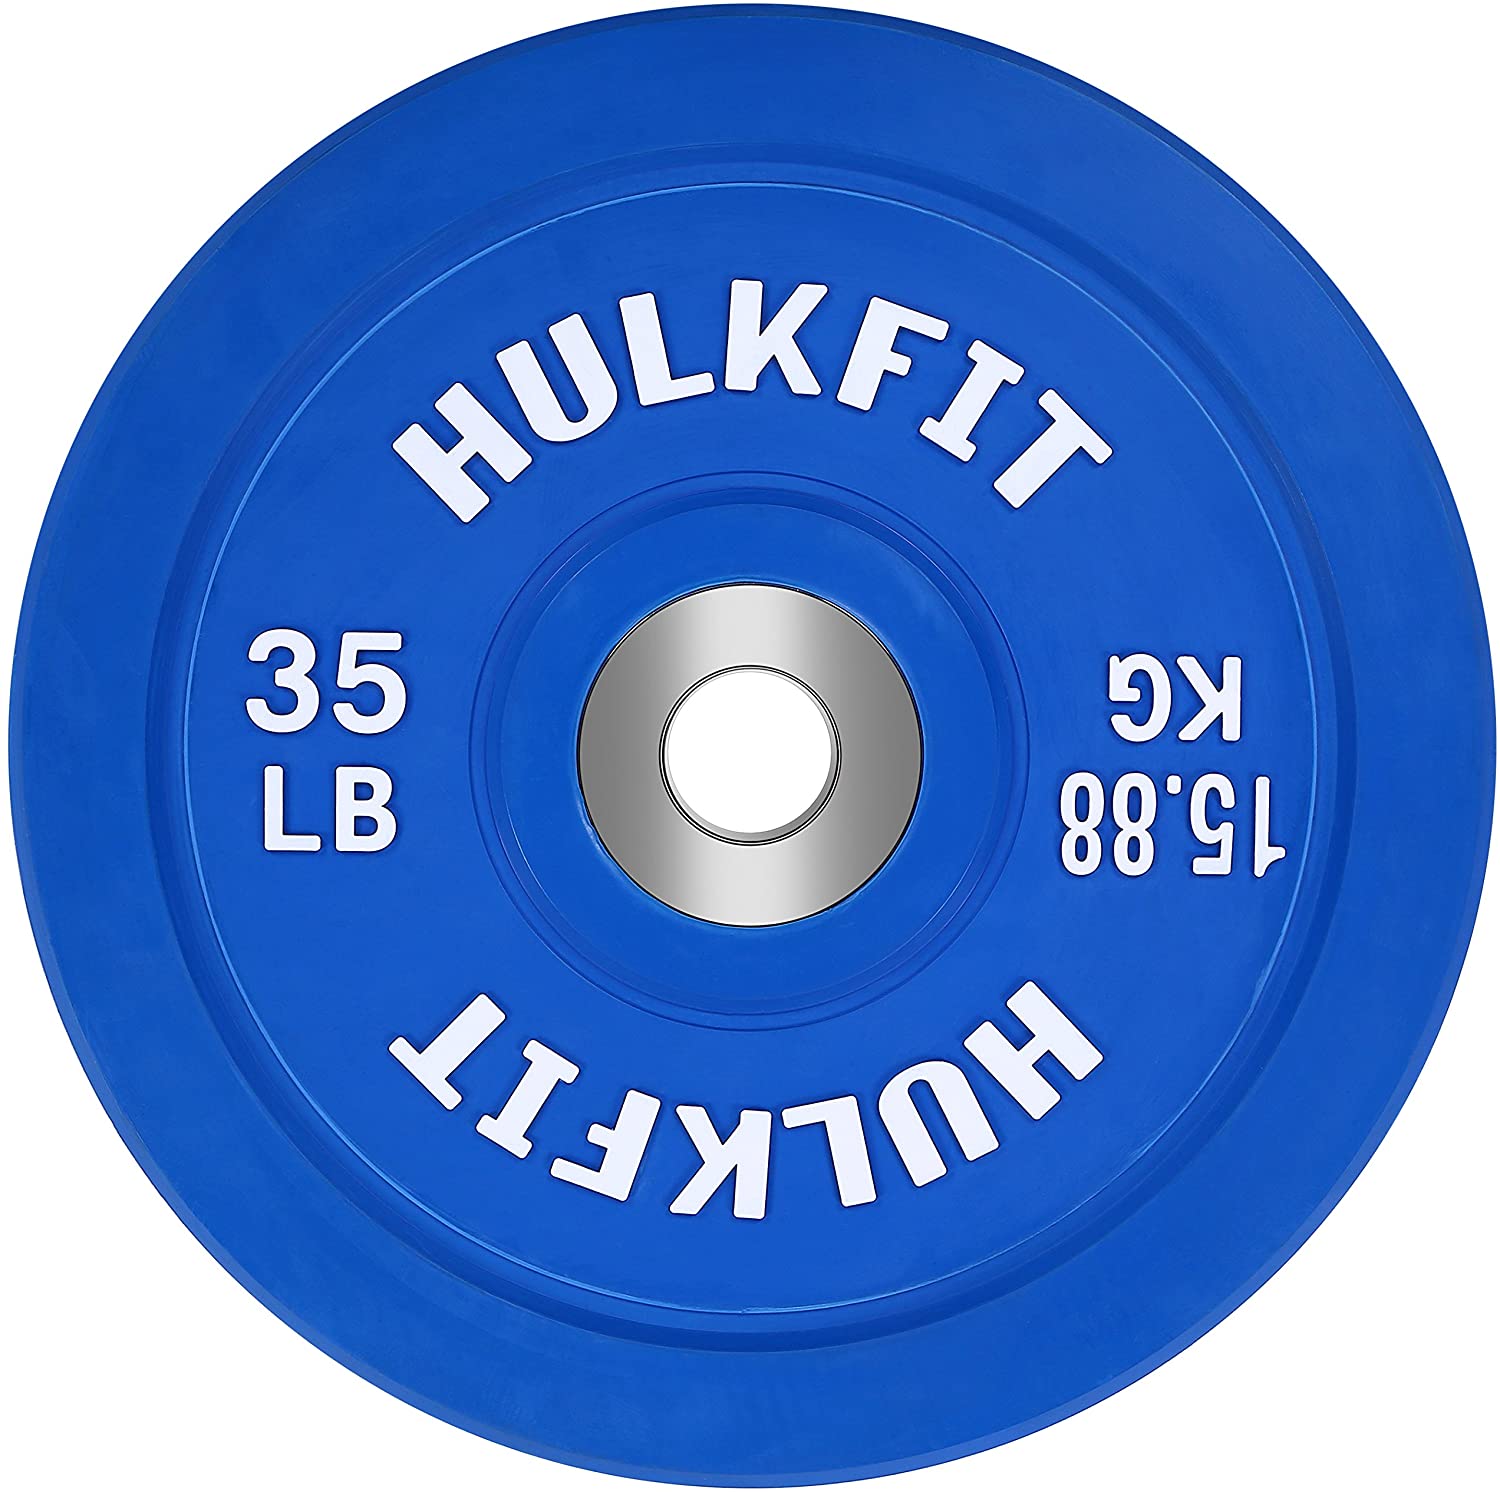 Gym; Home Gym; Garage Gym; Sports; Workout; Strength & Conditioning; Strength Training; Powerlifting; Olympic Weightlifting; Strongman; Weight Plates; Bumper Plates; Olympic Barbell; Olympic Bumper Plates